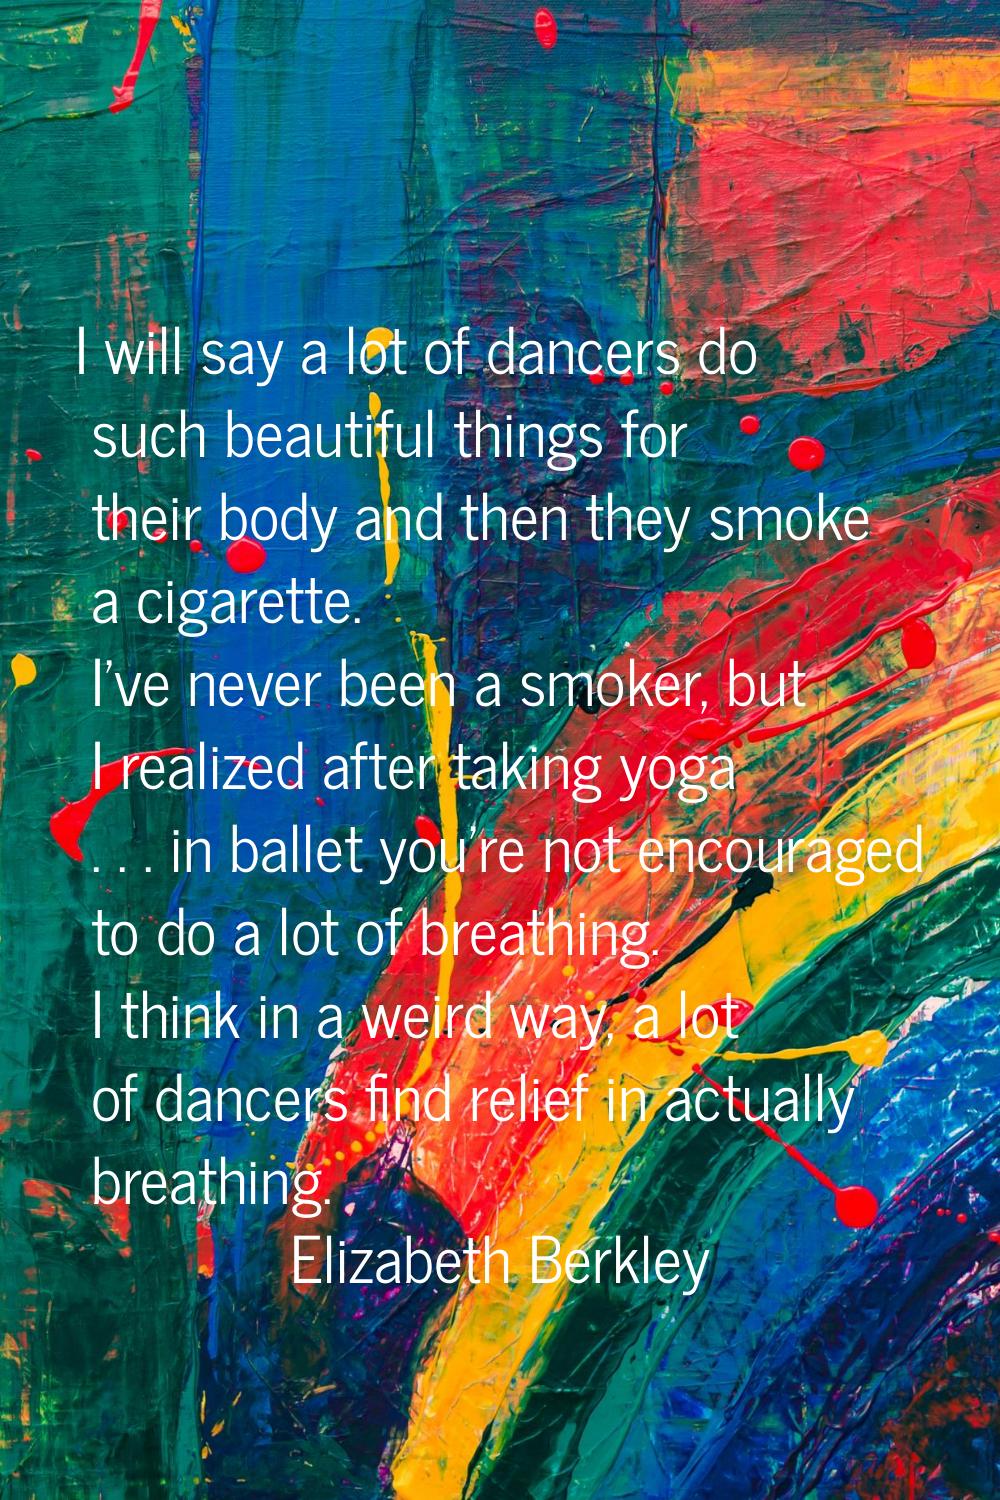 I will say a lot of dancers do such beautiful things for their body and then they smoke a cigarette